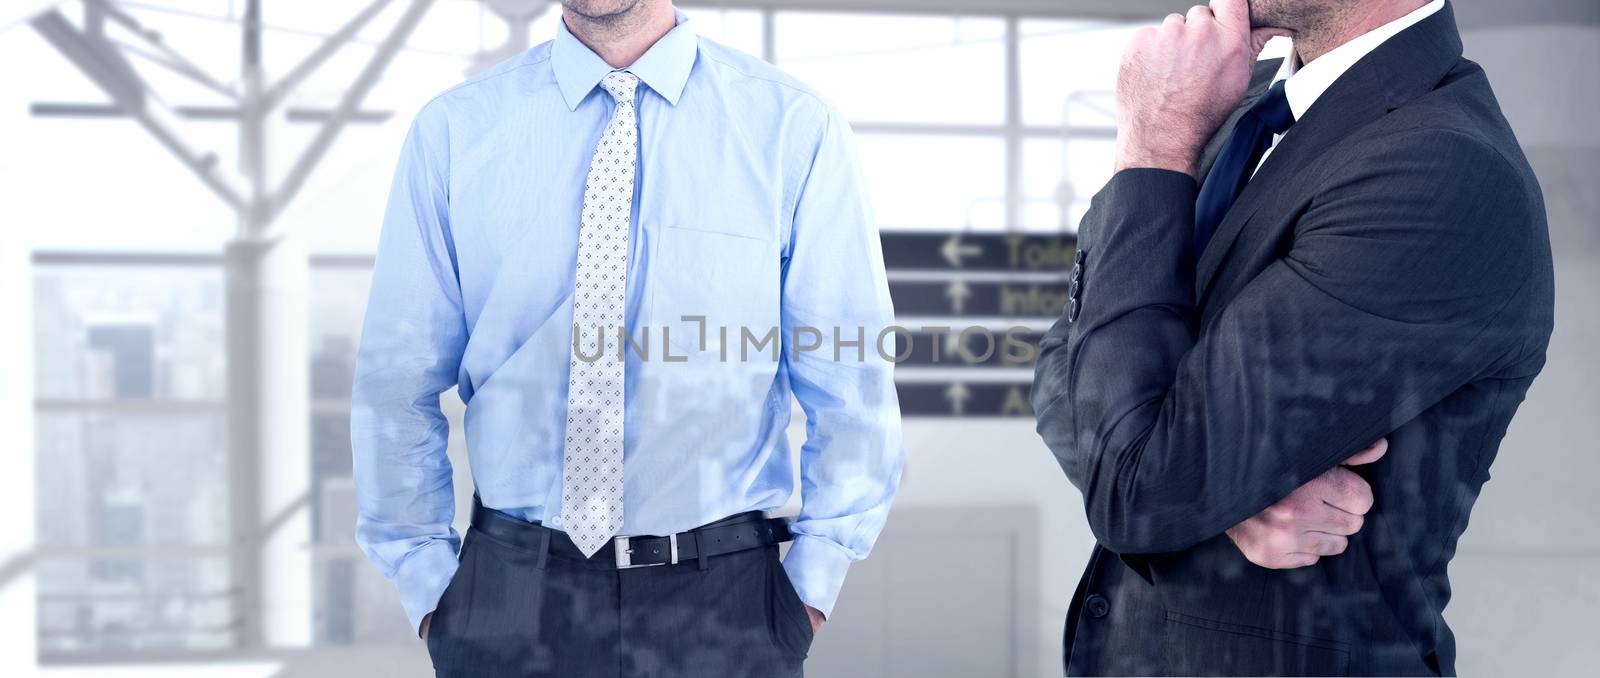 Frowning businessman thinking  against airport terminal